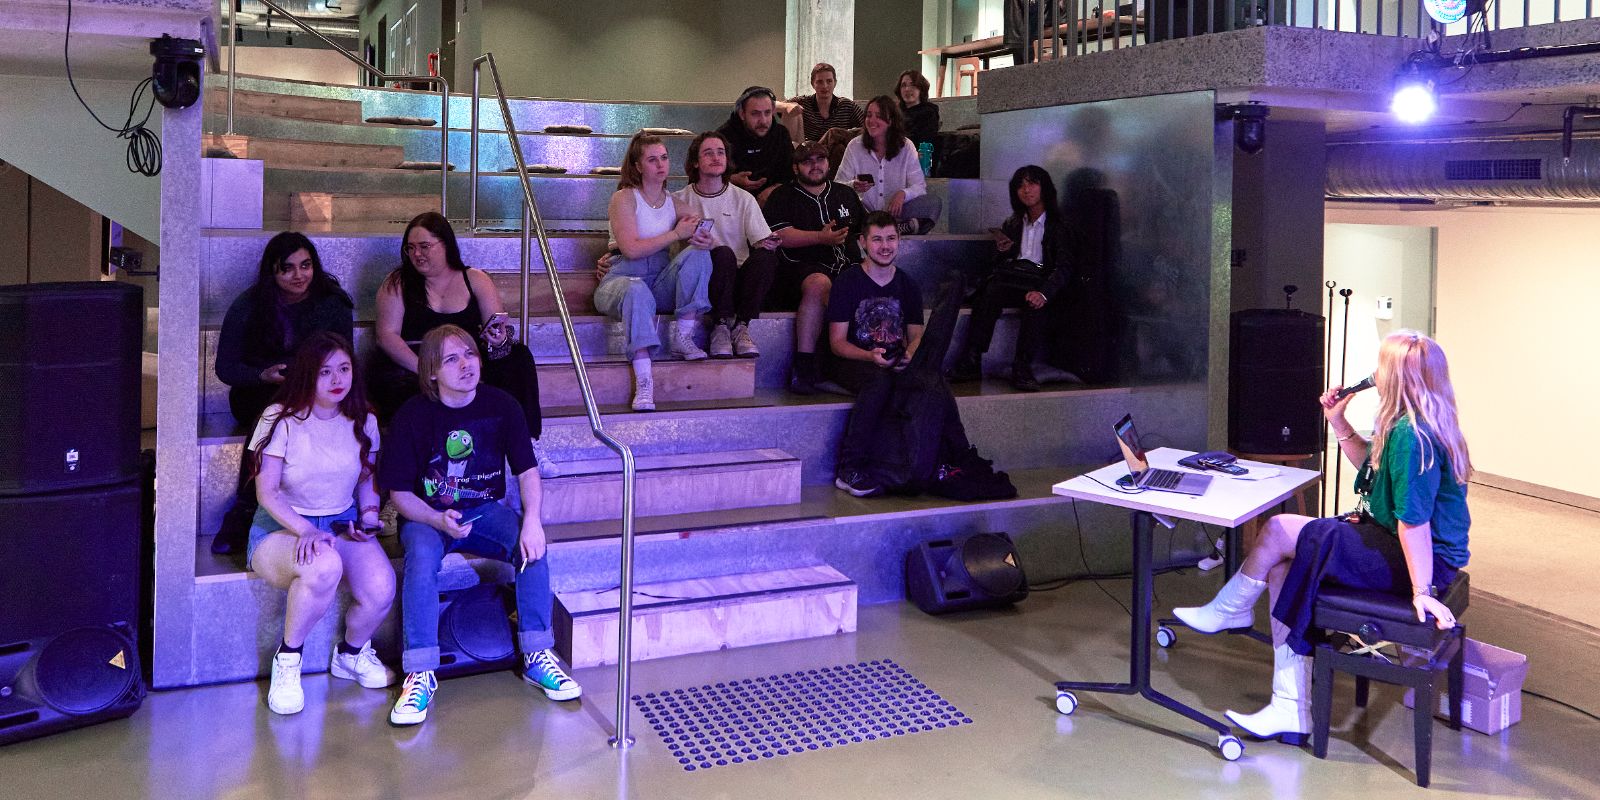 Student audience in an amphitheatre with a host on stage.